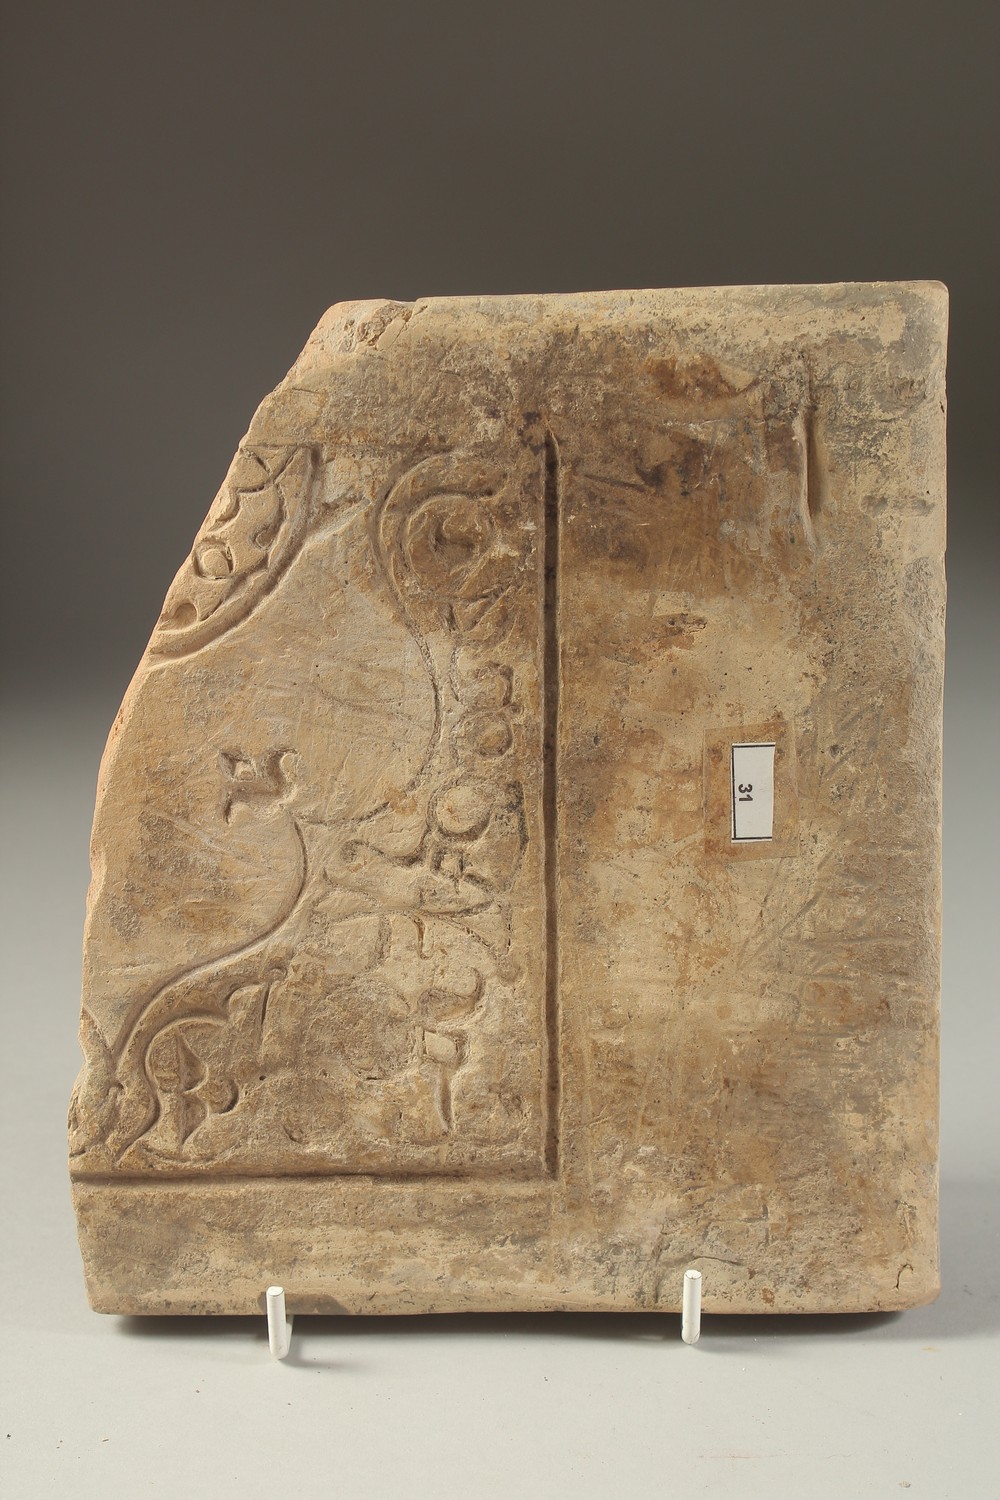 A RARE 12TH-13TH CENTURY PERSIAN SELJUK POSSIBLY HERAT OR KHORASSAN POTTERY MOULD, with fine - Image 2 of 2